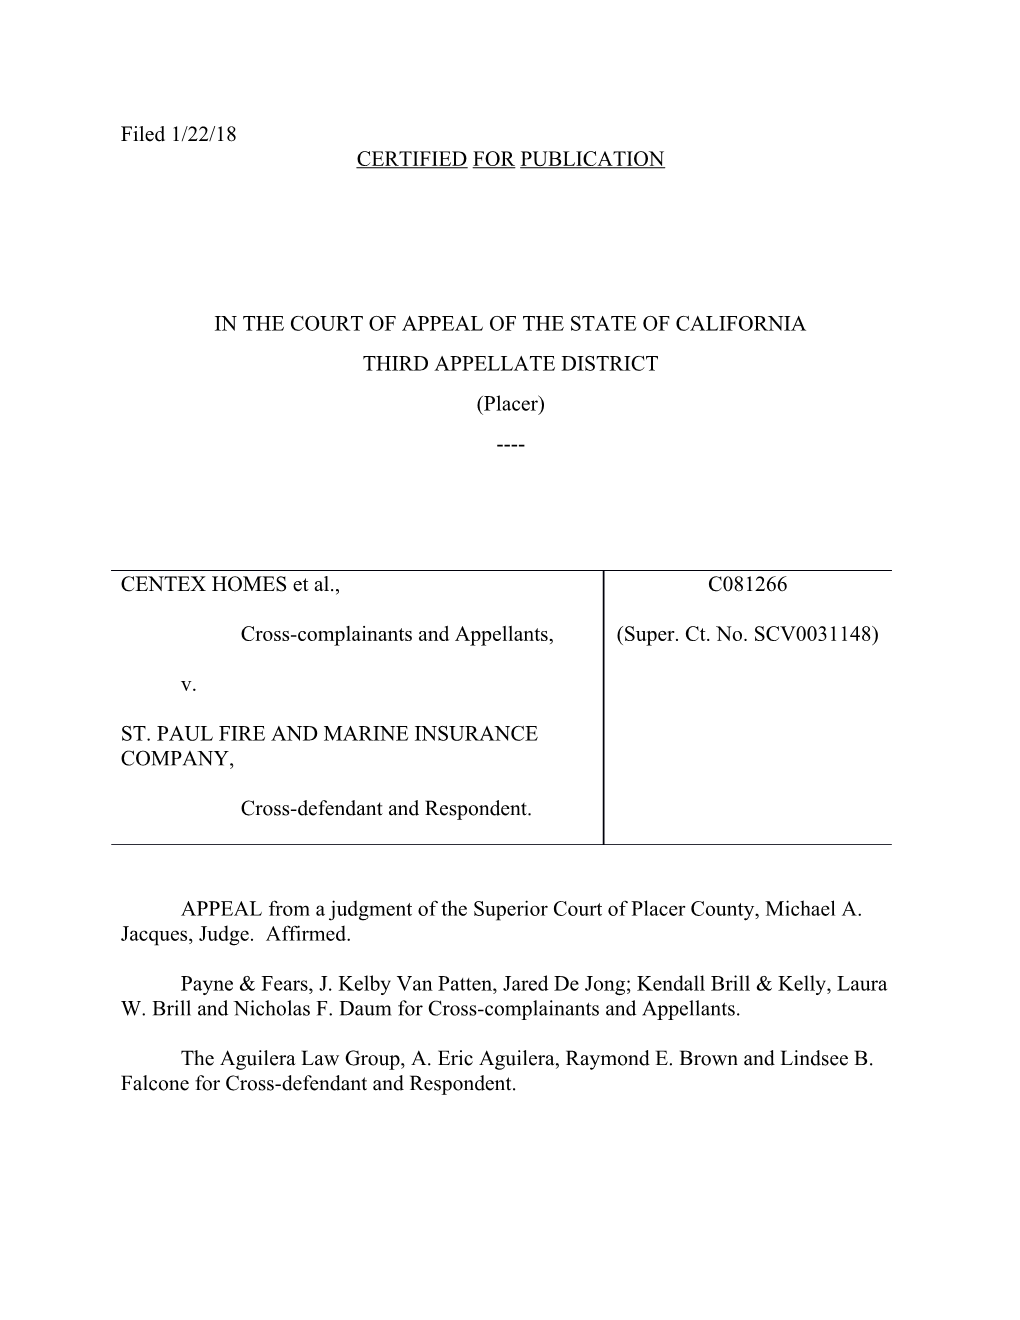 In the Court of Appeal of the State of California s9